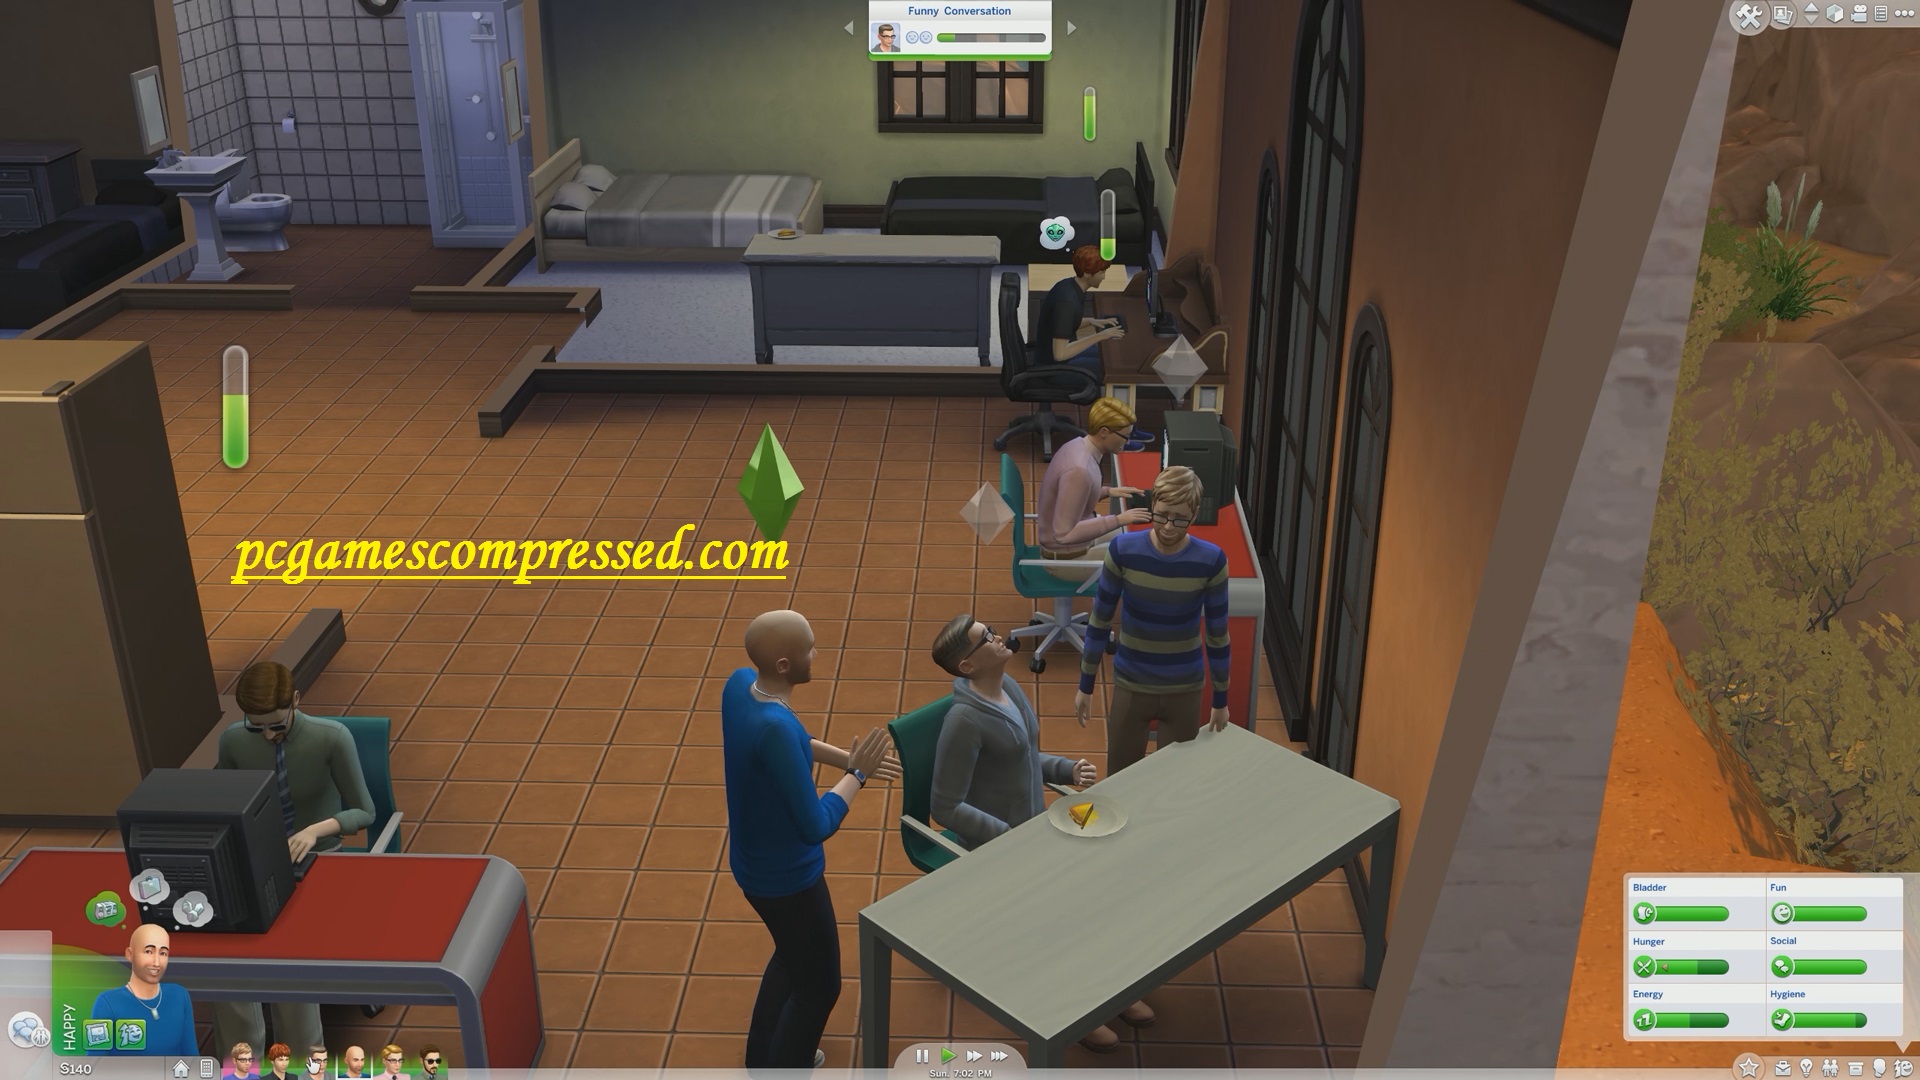 The Sims 4 Torrent